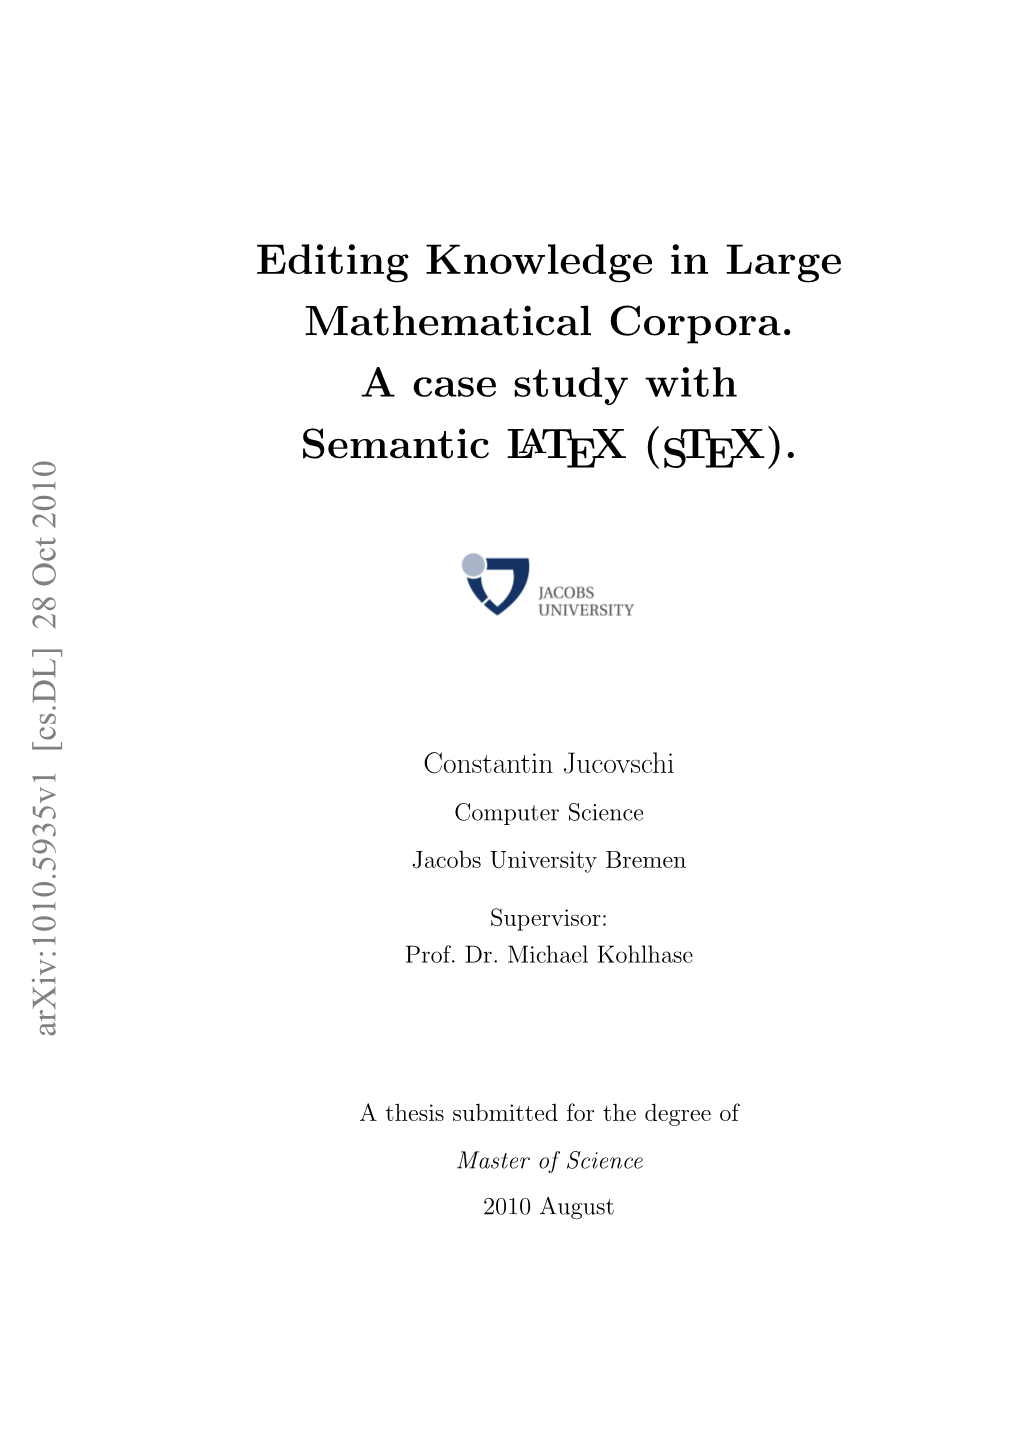 Editing Knowledge in Large Mathematical Corpora. a Case Study with Semantic LATEX(STEX)